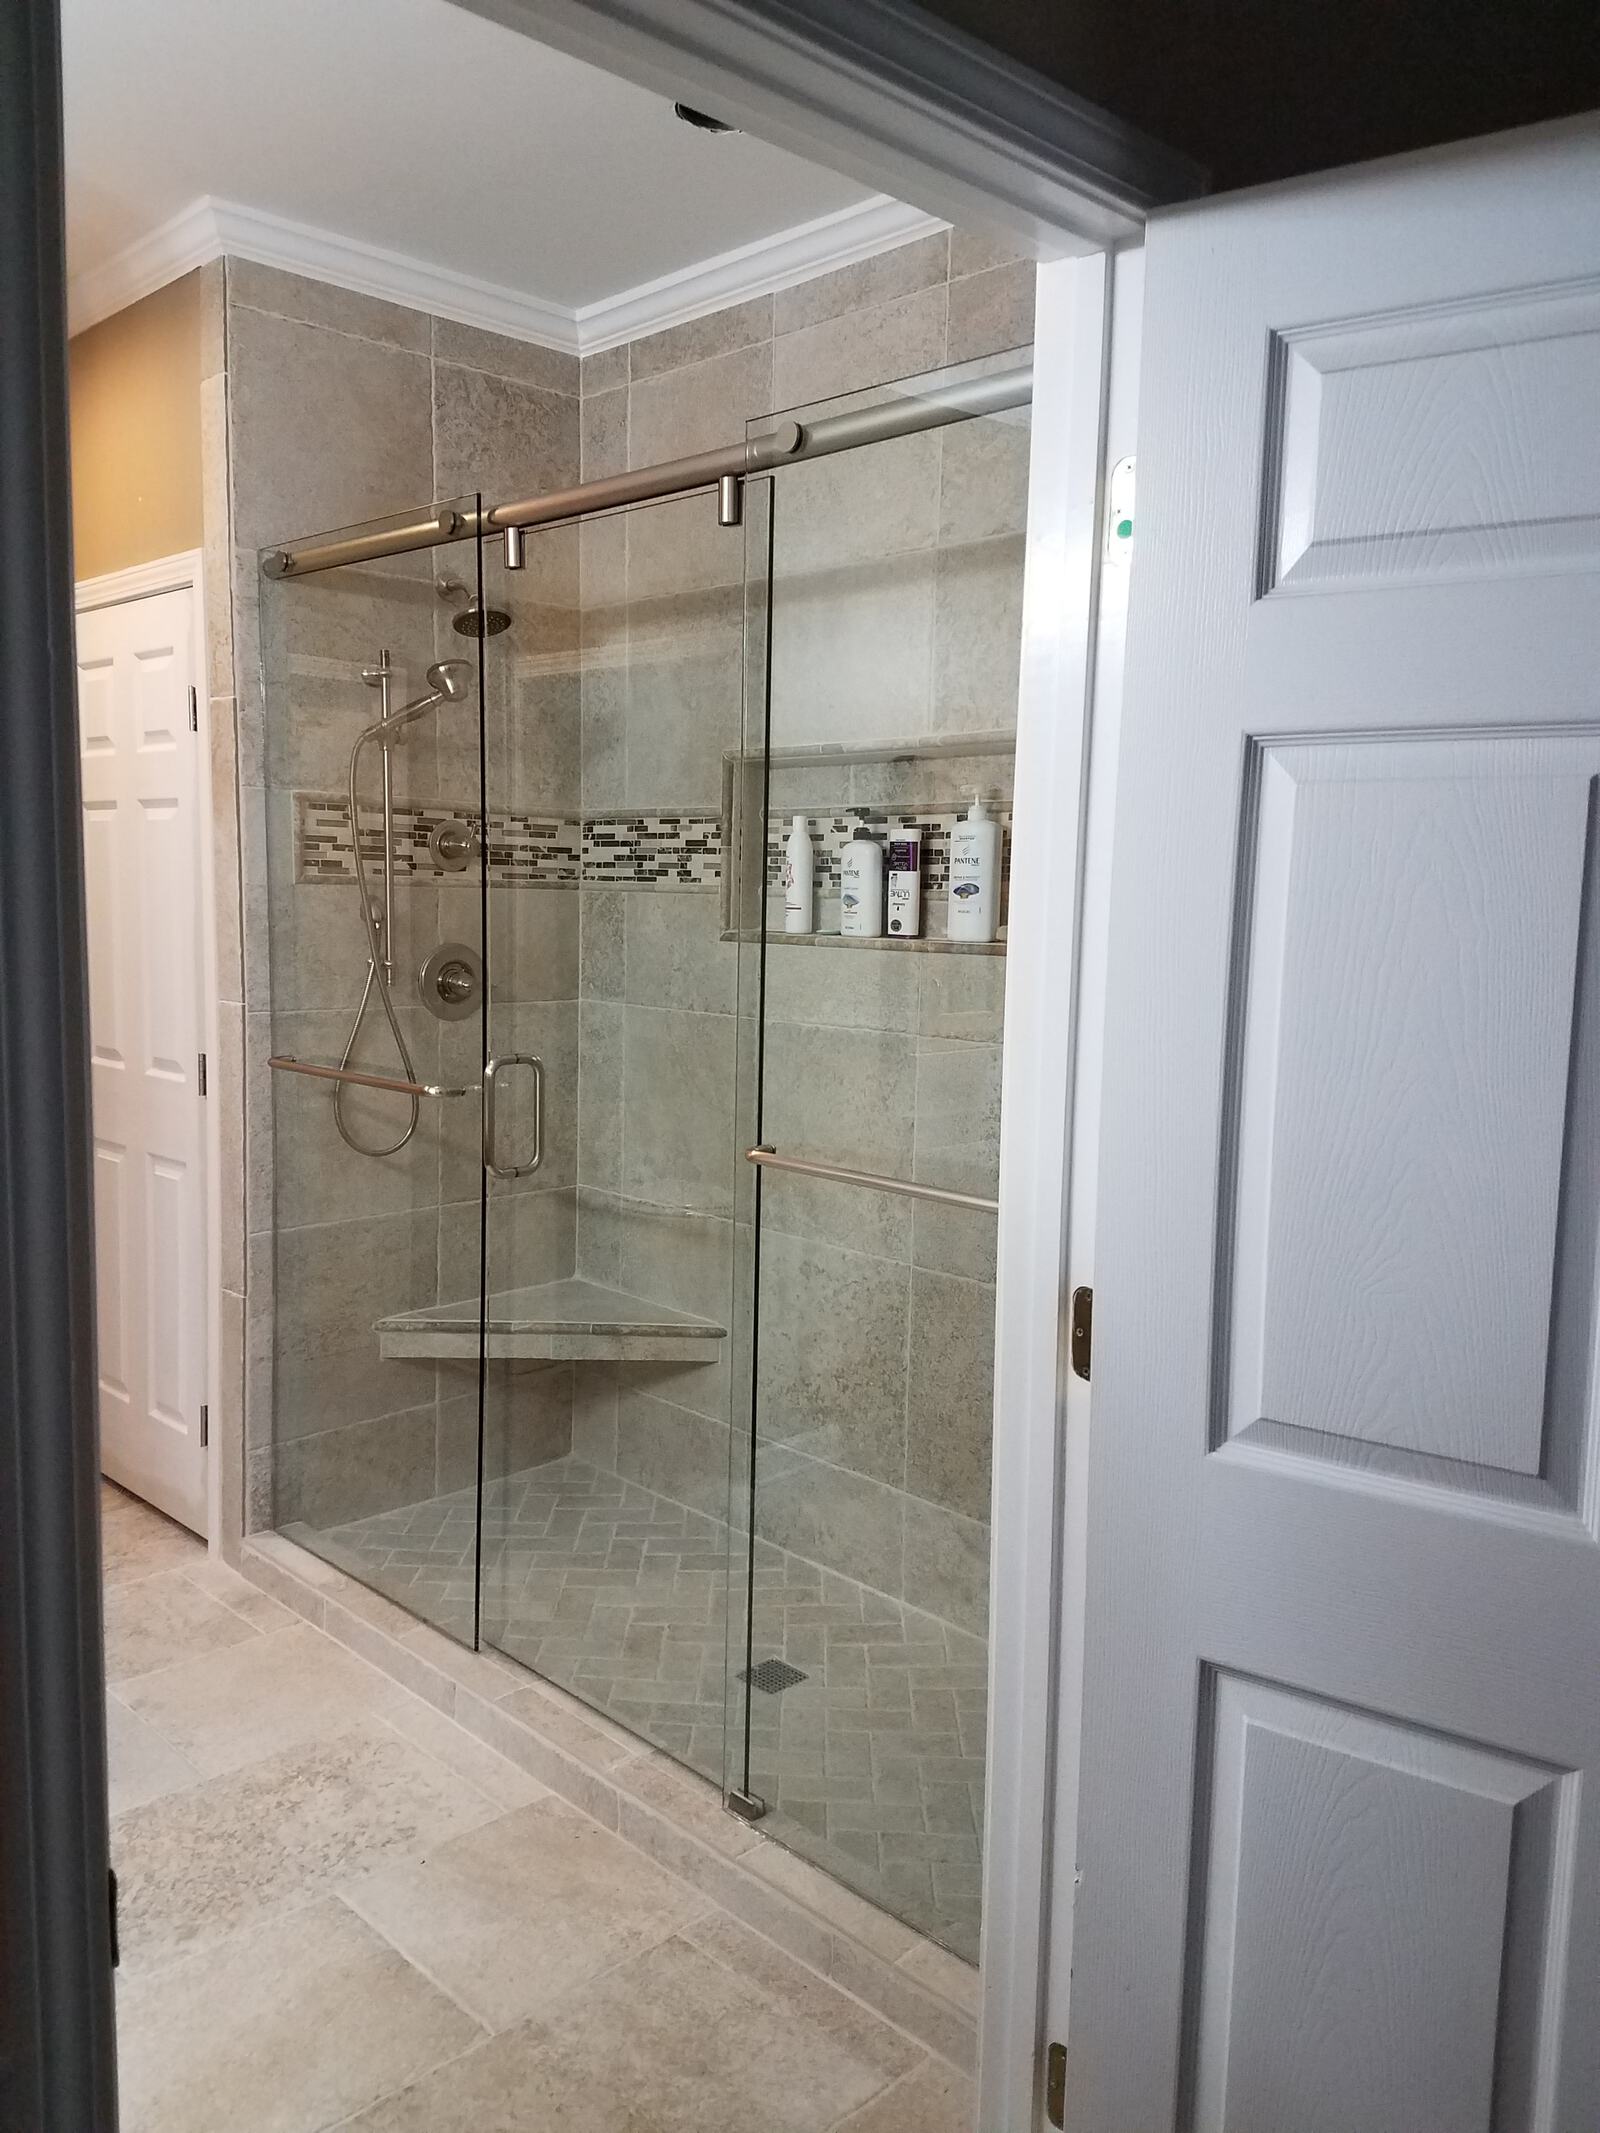 Hydroslide Shower Door.  This is similar style as the Barn Door pipeline series except rollers are inside the bar. Sophisticated design and manufactured with quality.